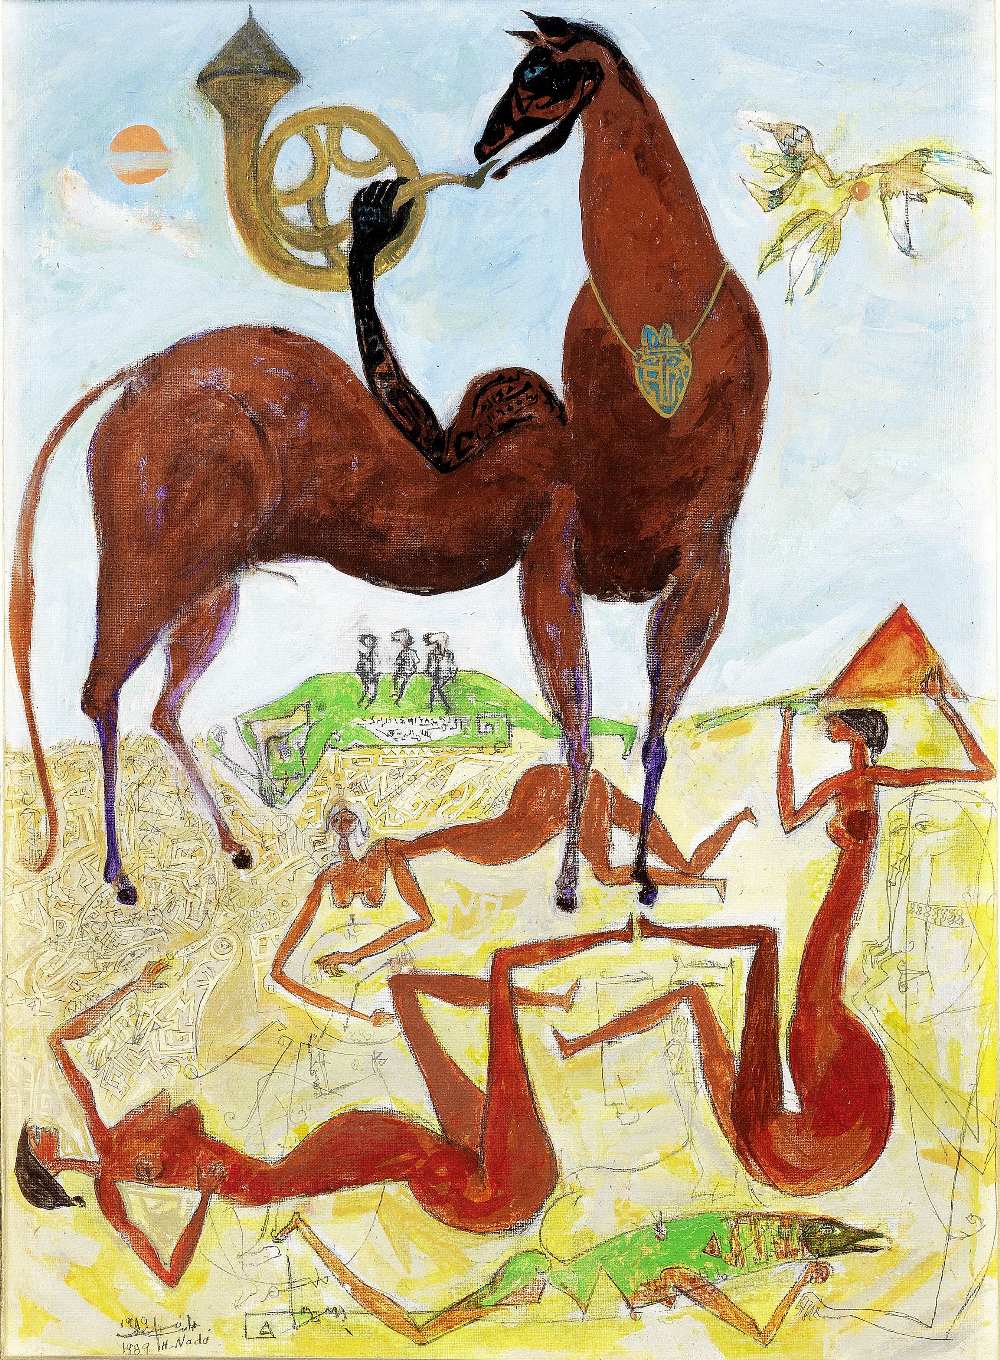 Hamed Nada (Egypt, 1924-1990) The Horse and the Dancers